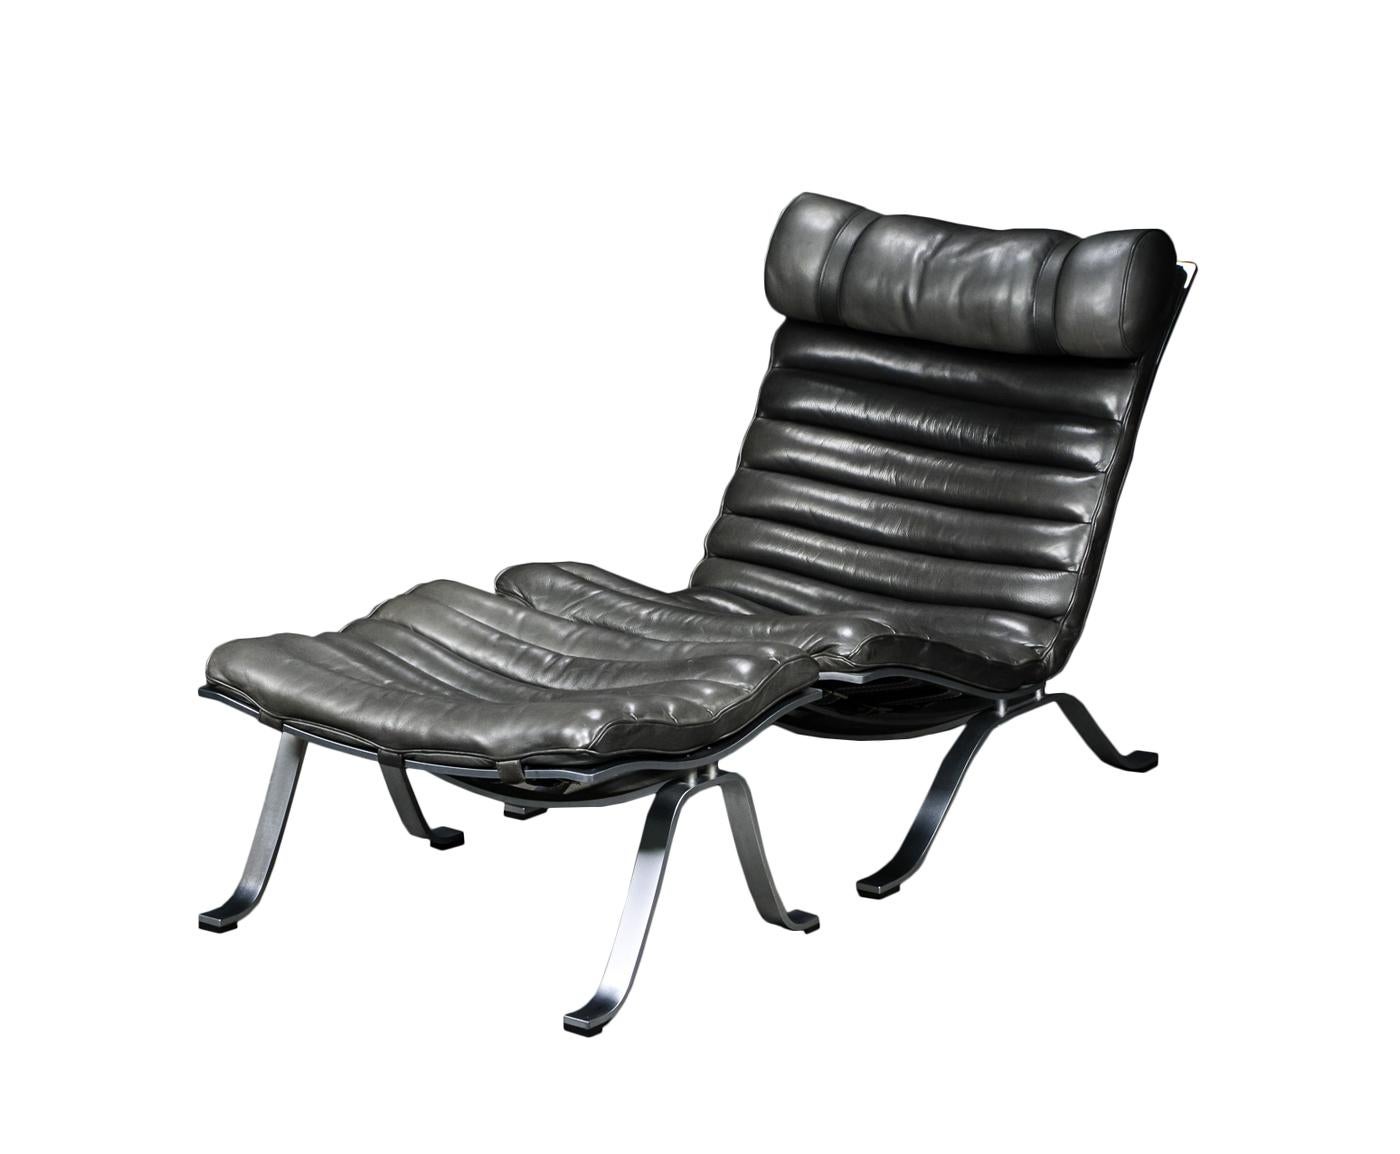 Offerd by Zitzo, Amsterdam: Comfortable lounge chair with ottoman designed by Arne Norell. This award winning lounge chair was made of high quality flat chrome-plated steel and has very thick original black buffalo leather. The set is in beautiful